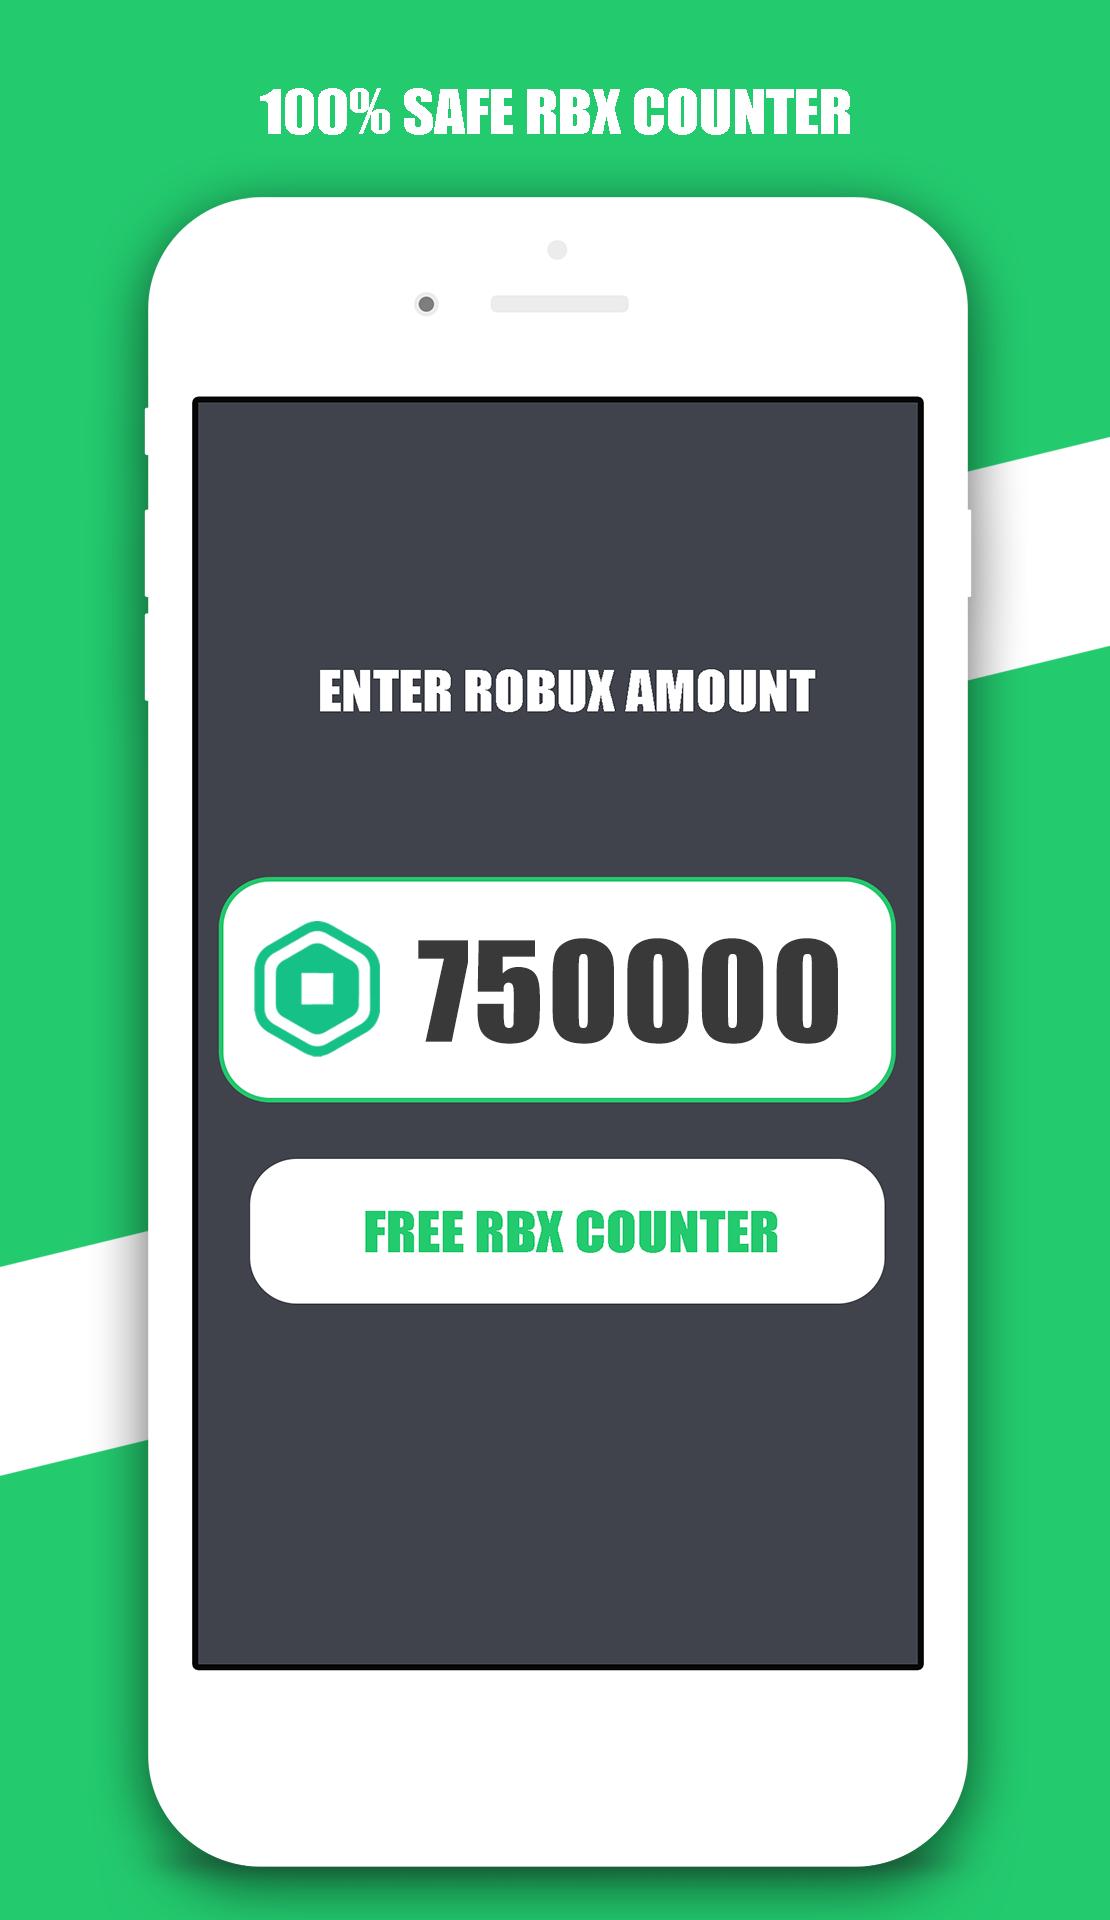 Free Robux Counter For Android Apk Download - get free robux counter for roblox apk download apkpure com